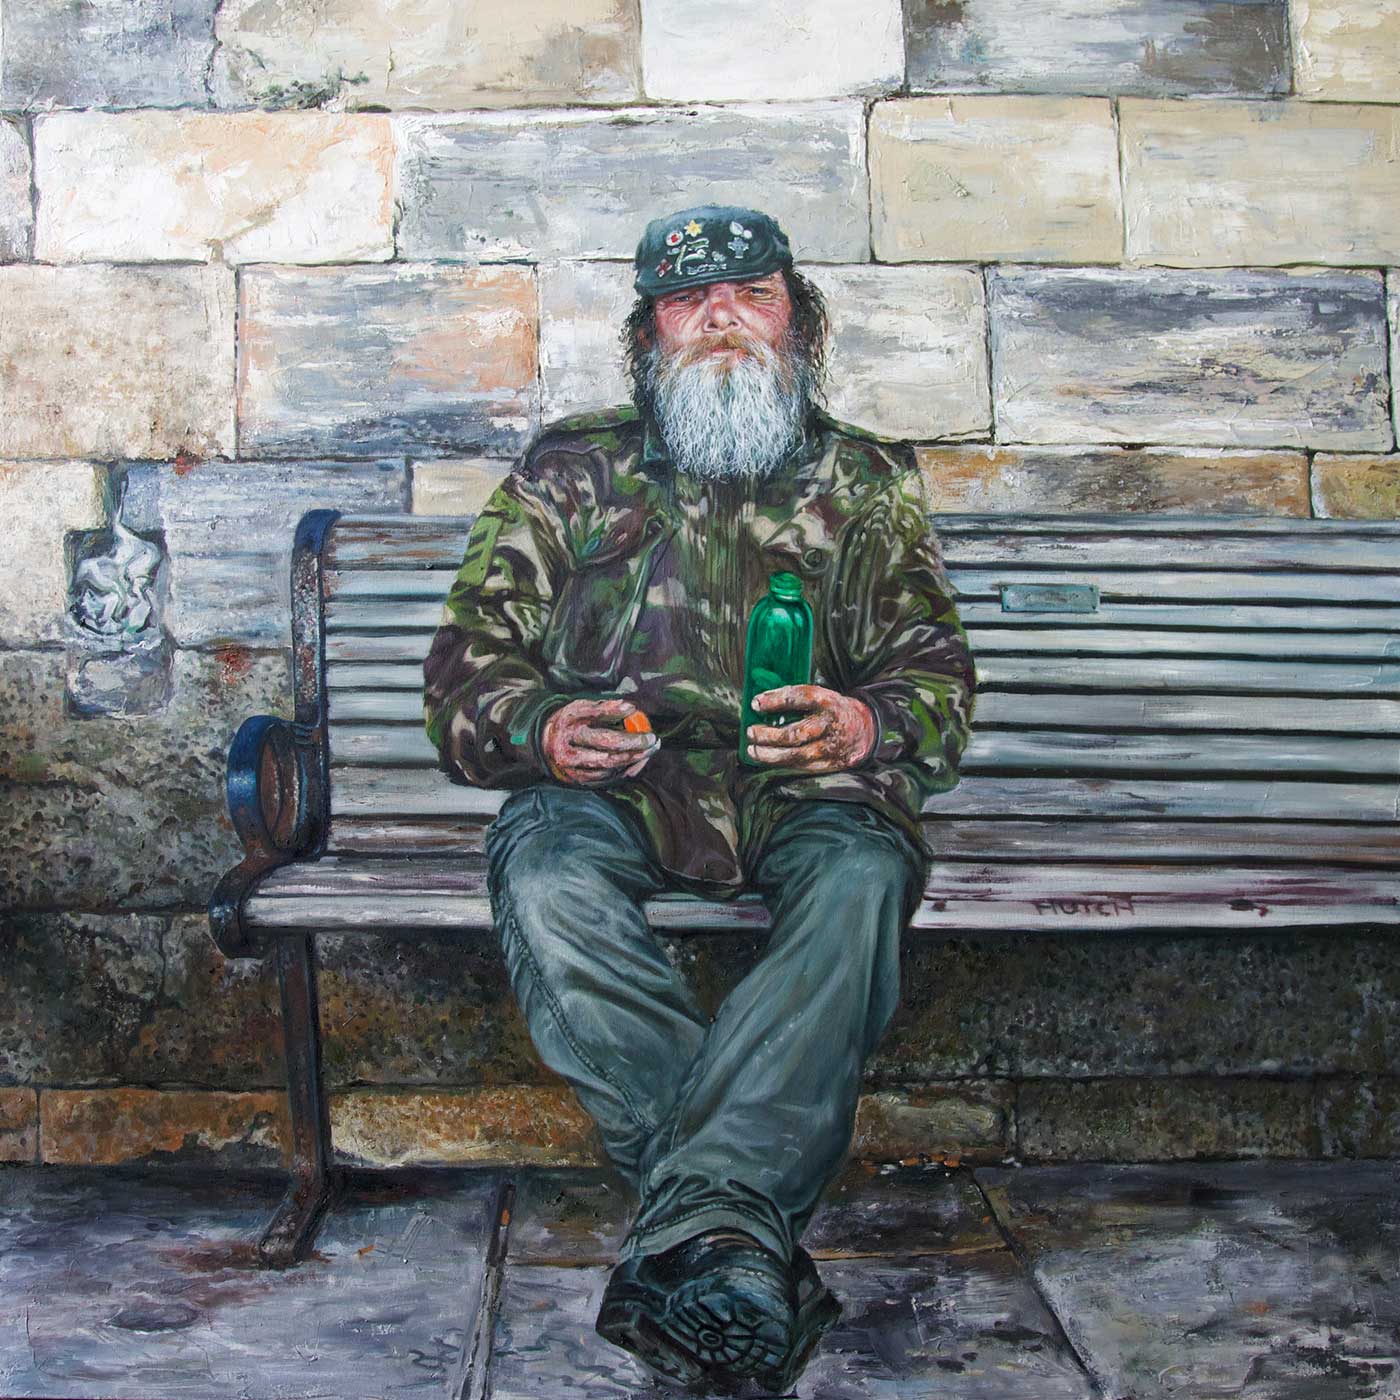 Alan: Oil on Canvas. Alan has been on the street for over 30 years. I know this because he keeps telling me.